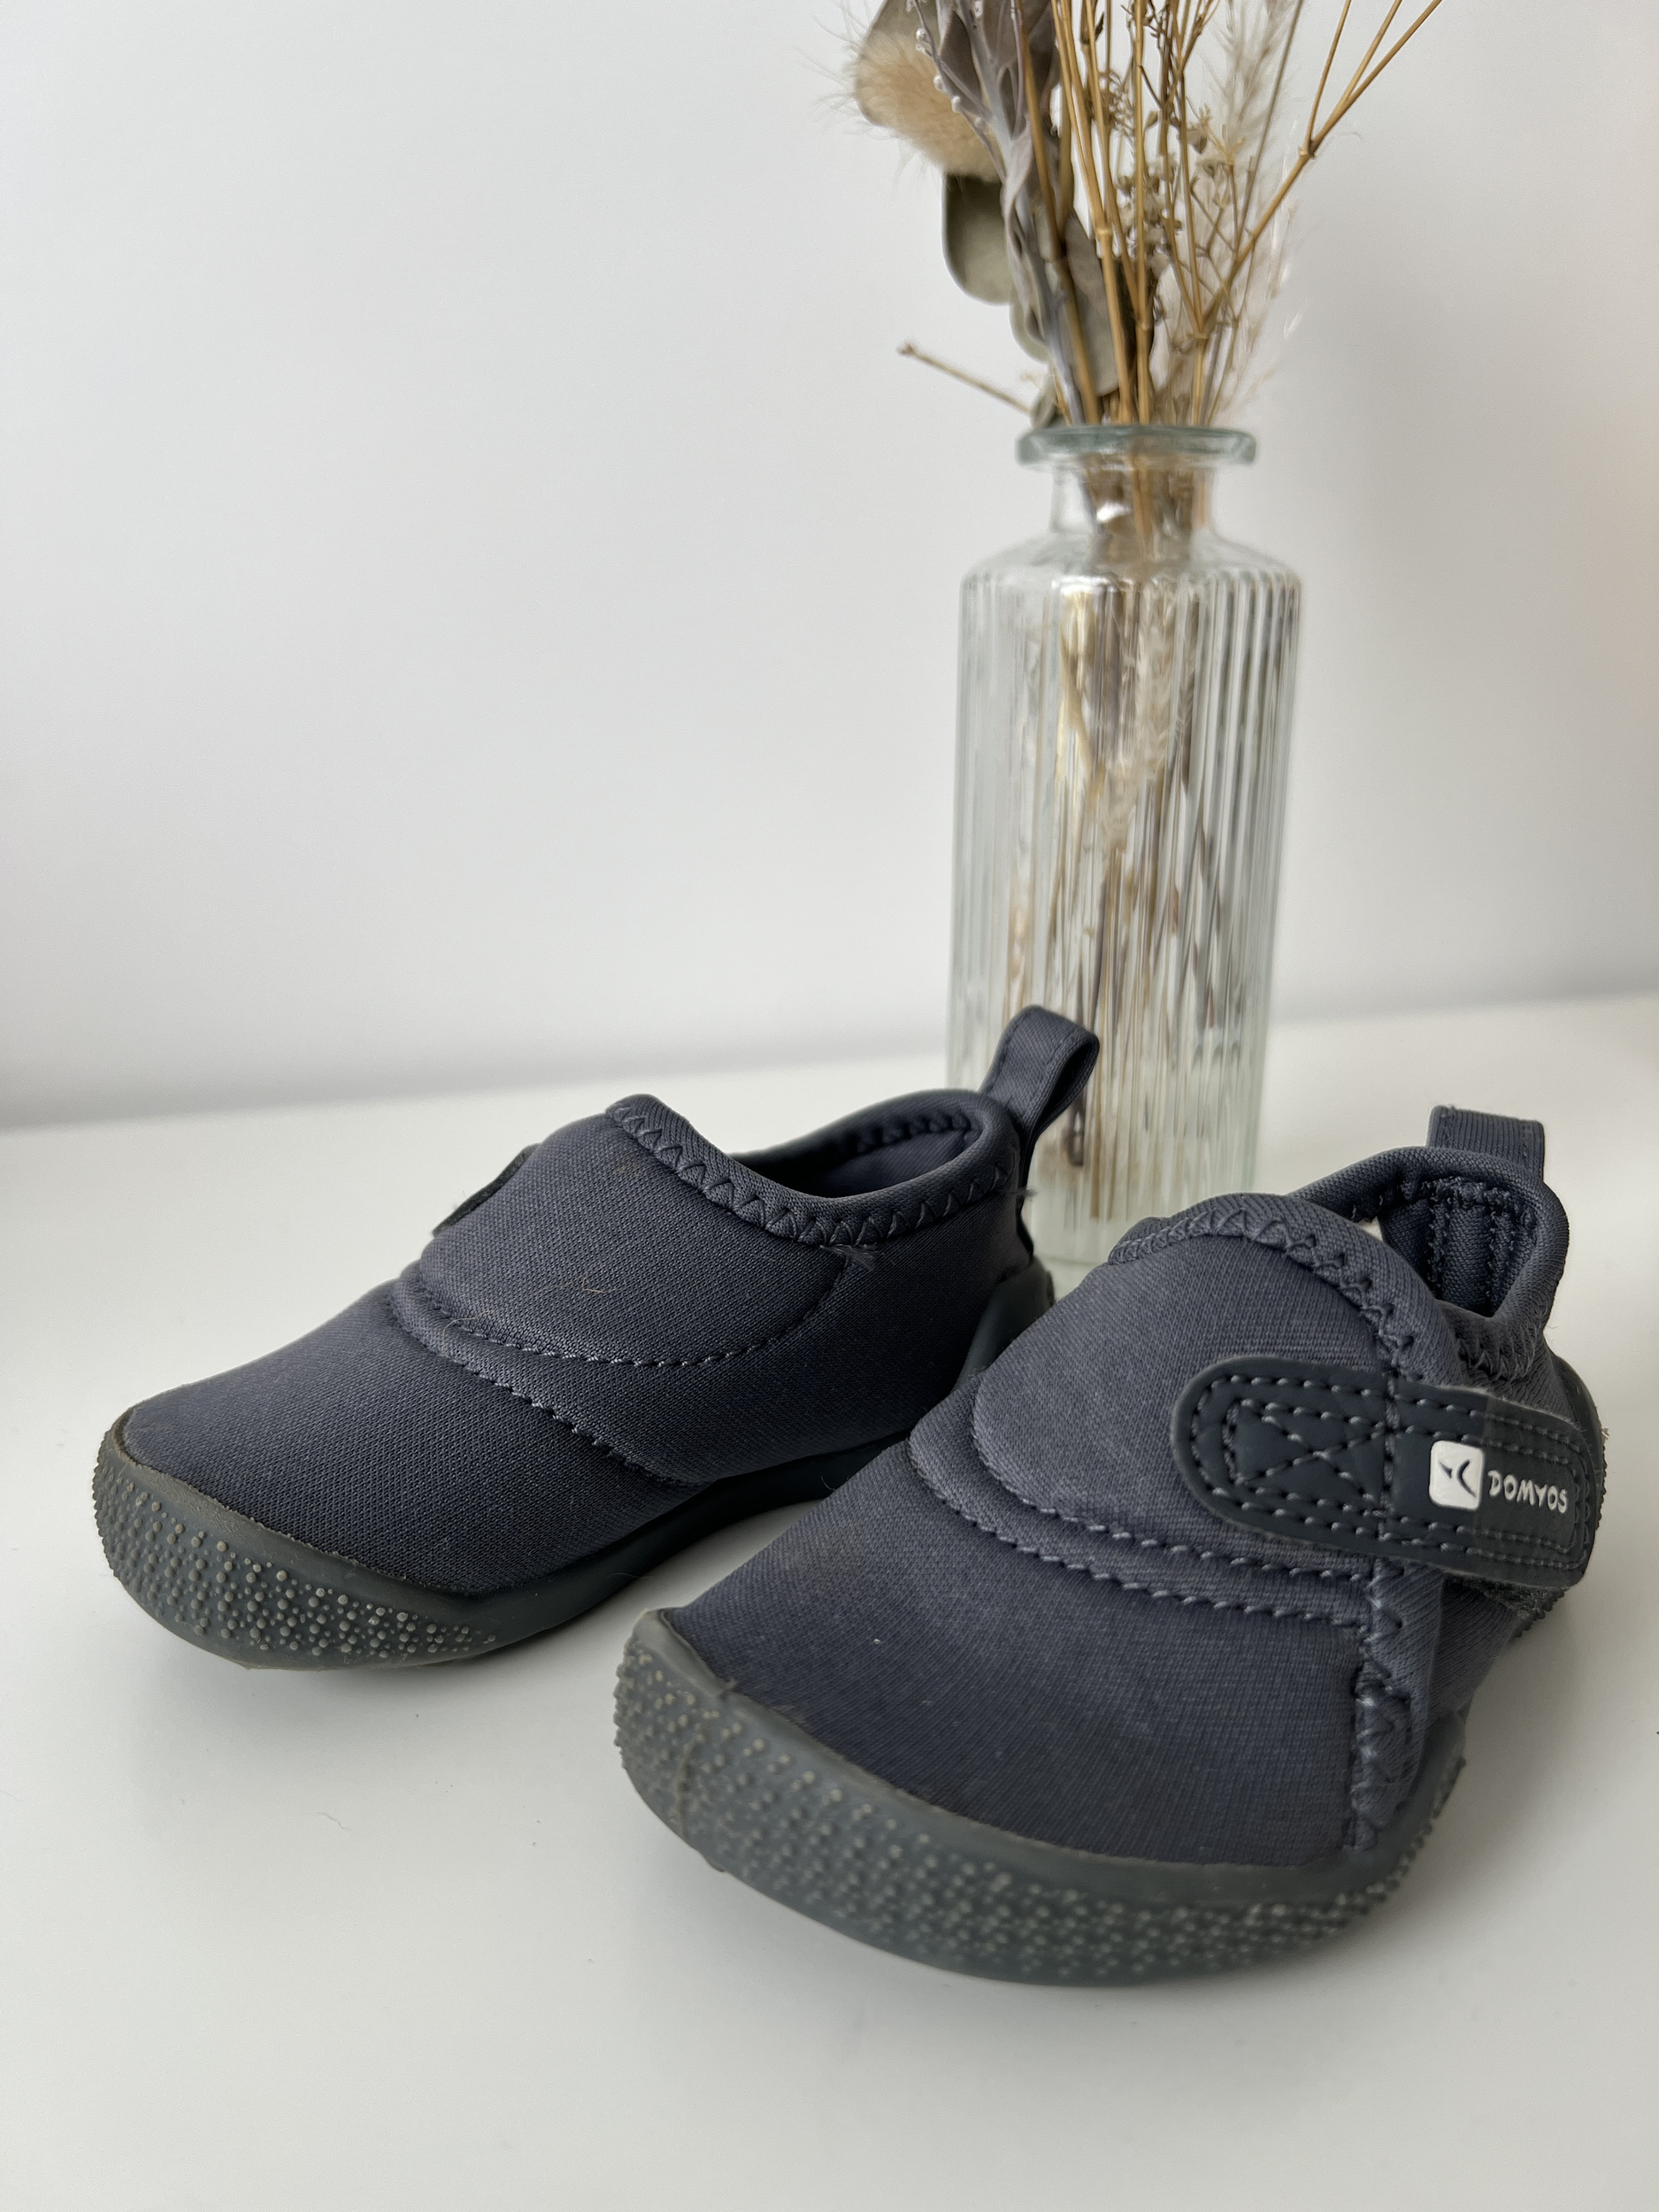 Chaussures grise - Domyos - Pointure 20